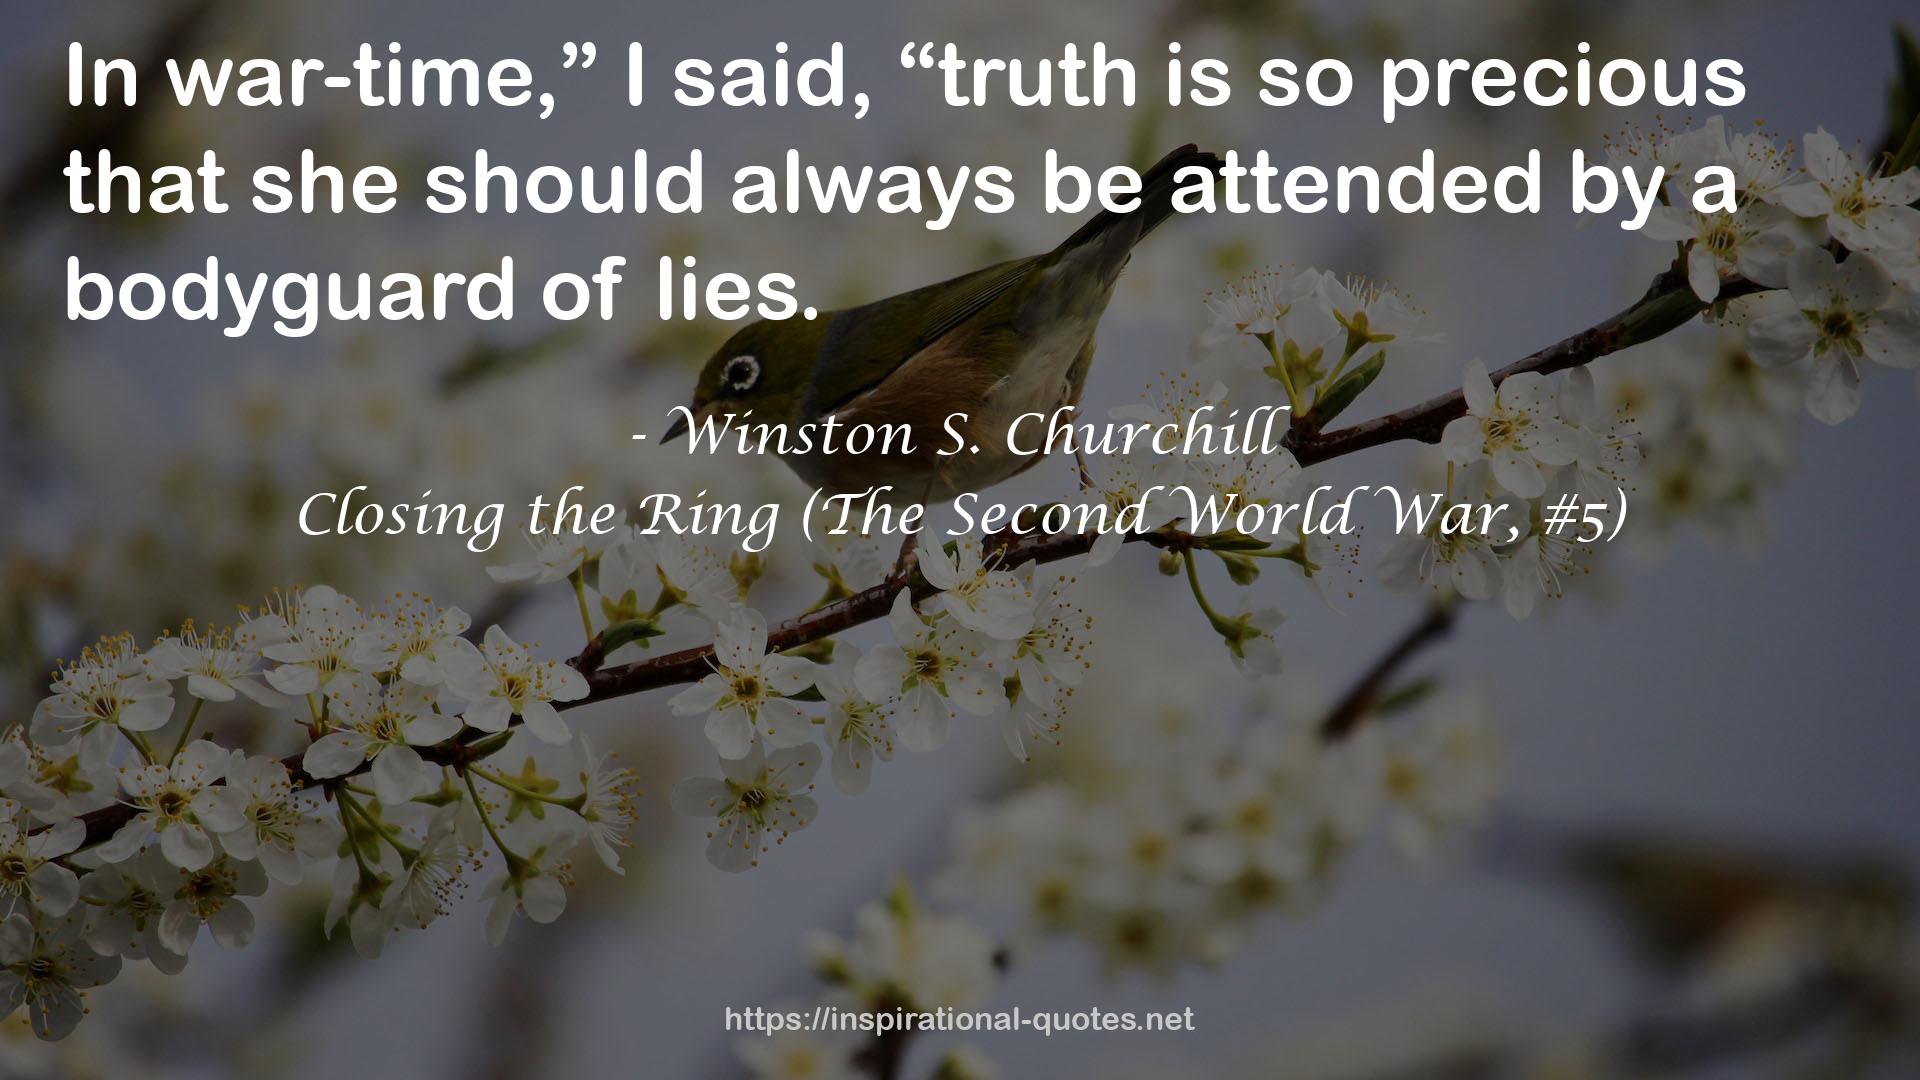 Closing the Ring (The Second World War, #5) QUOTES